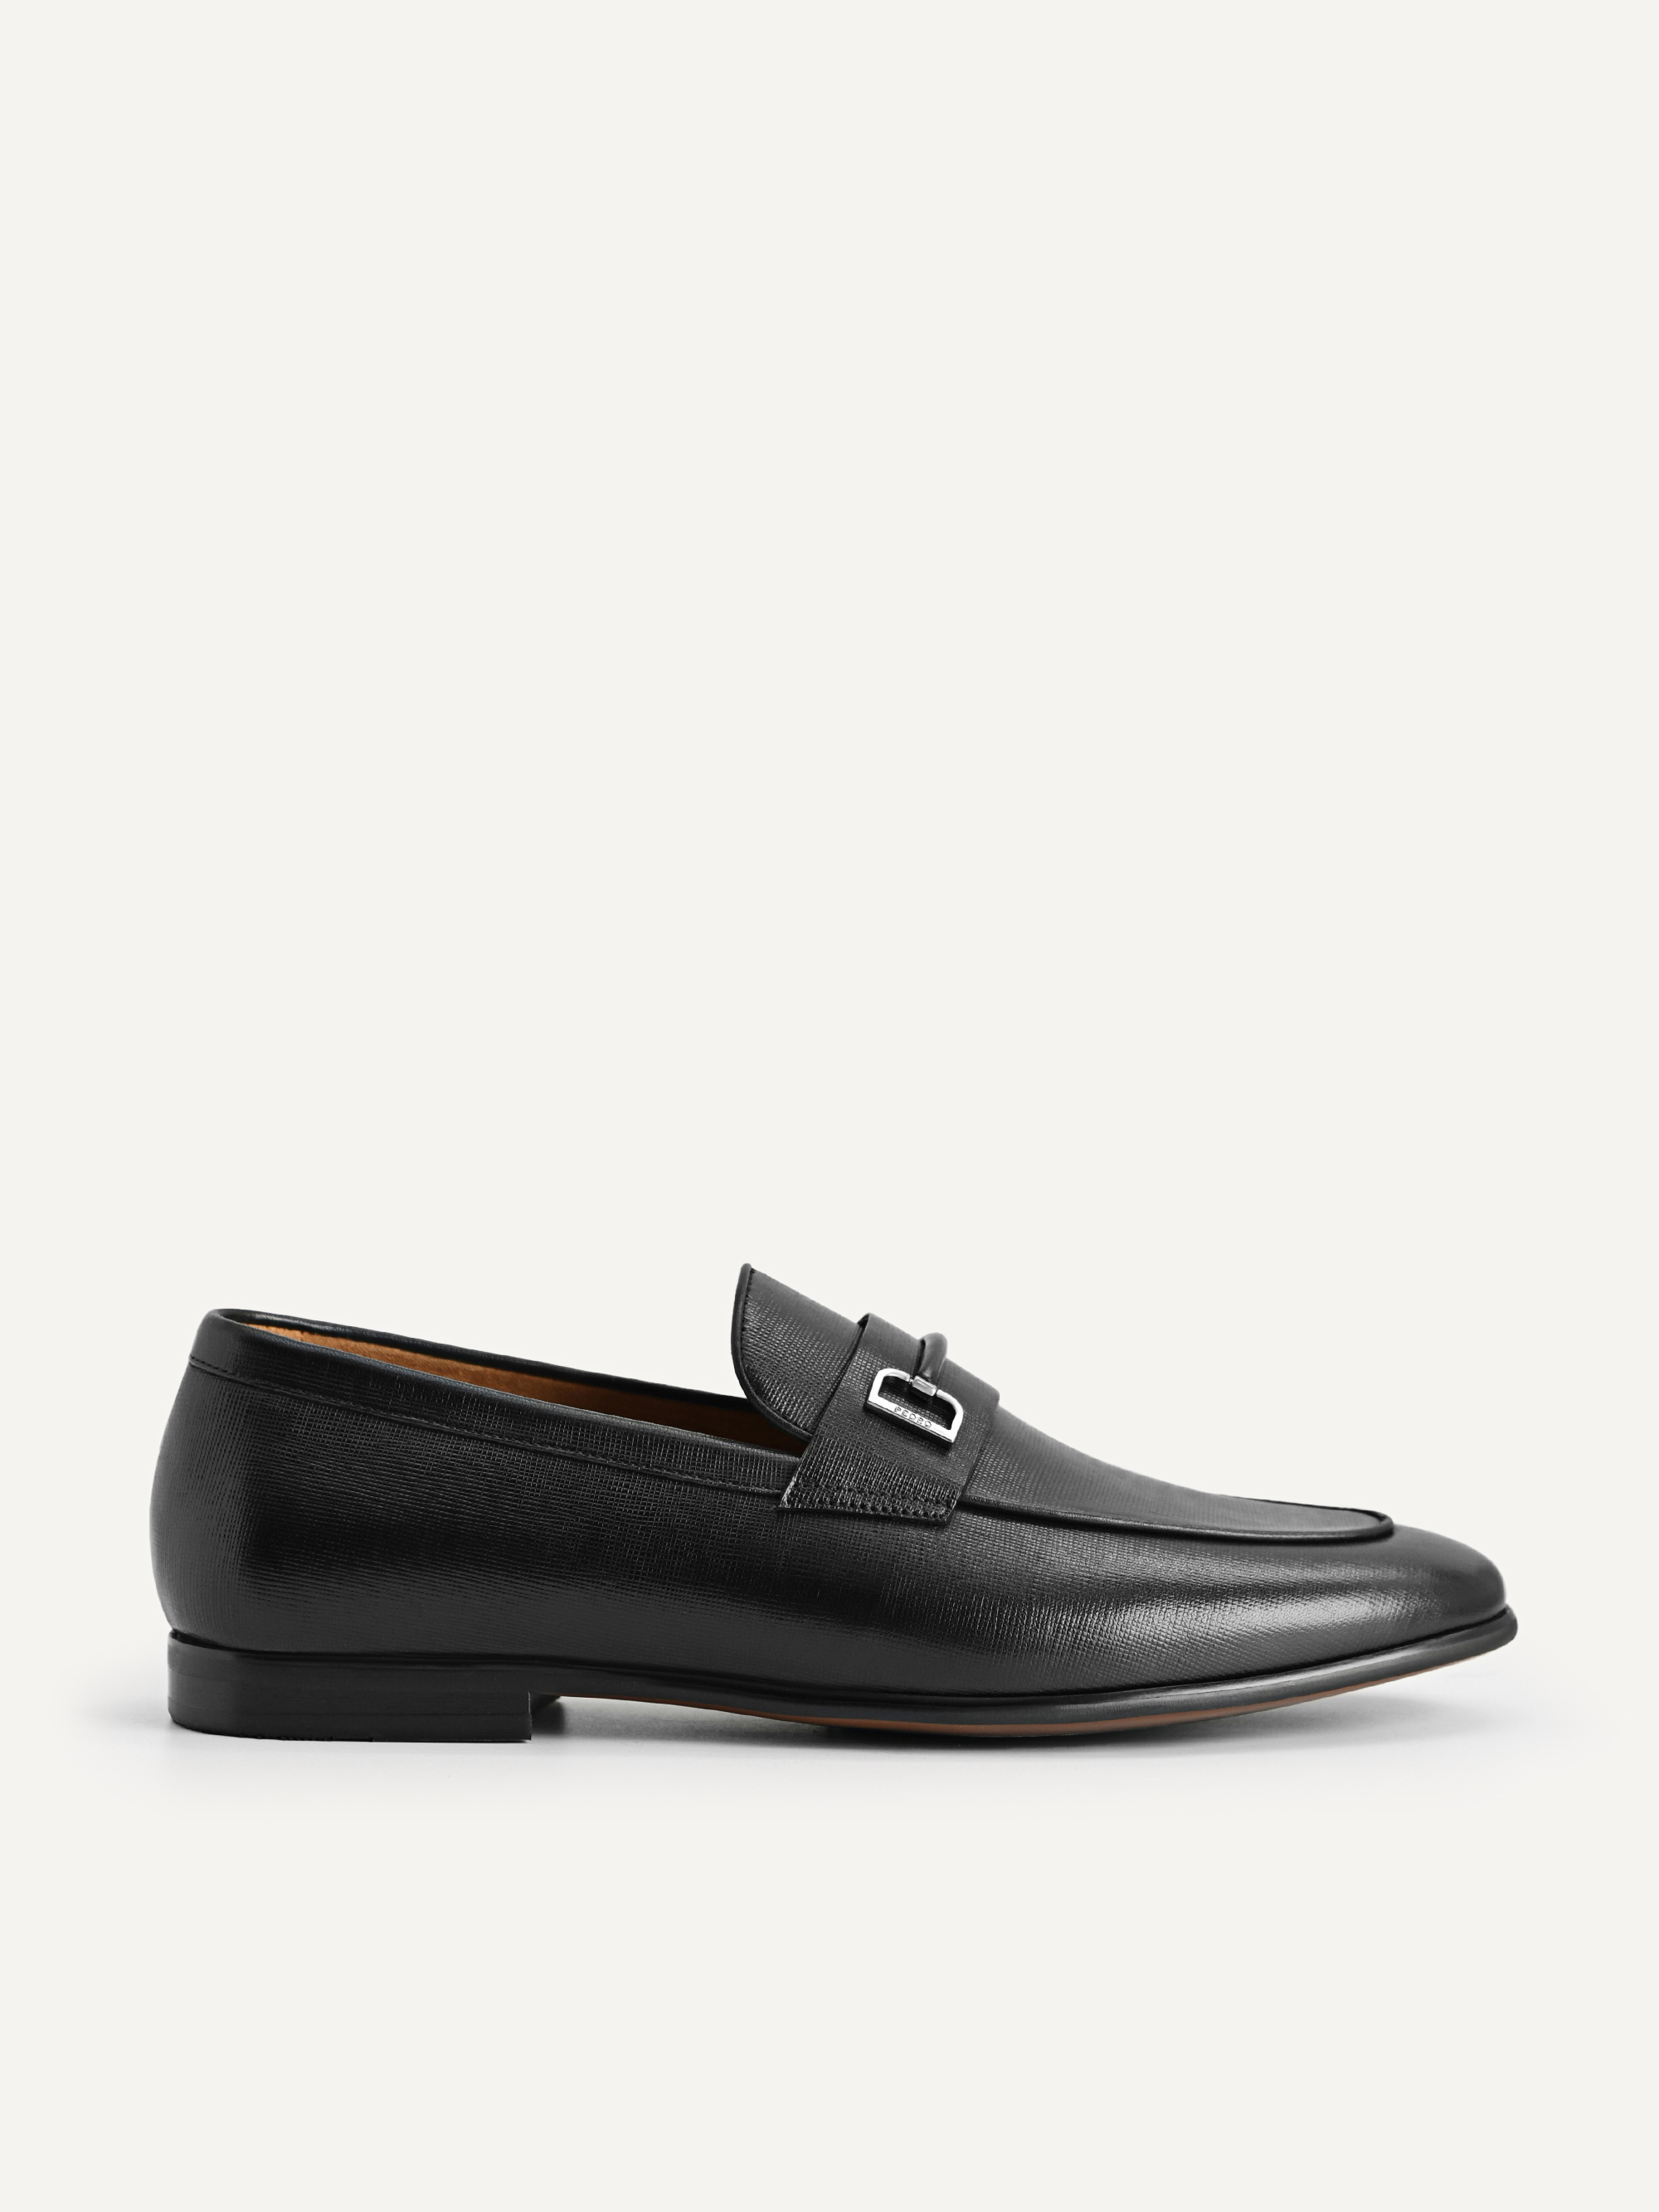 Black Textured Leather Loafers with Metal Bit | PEDRO